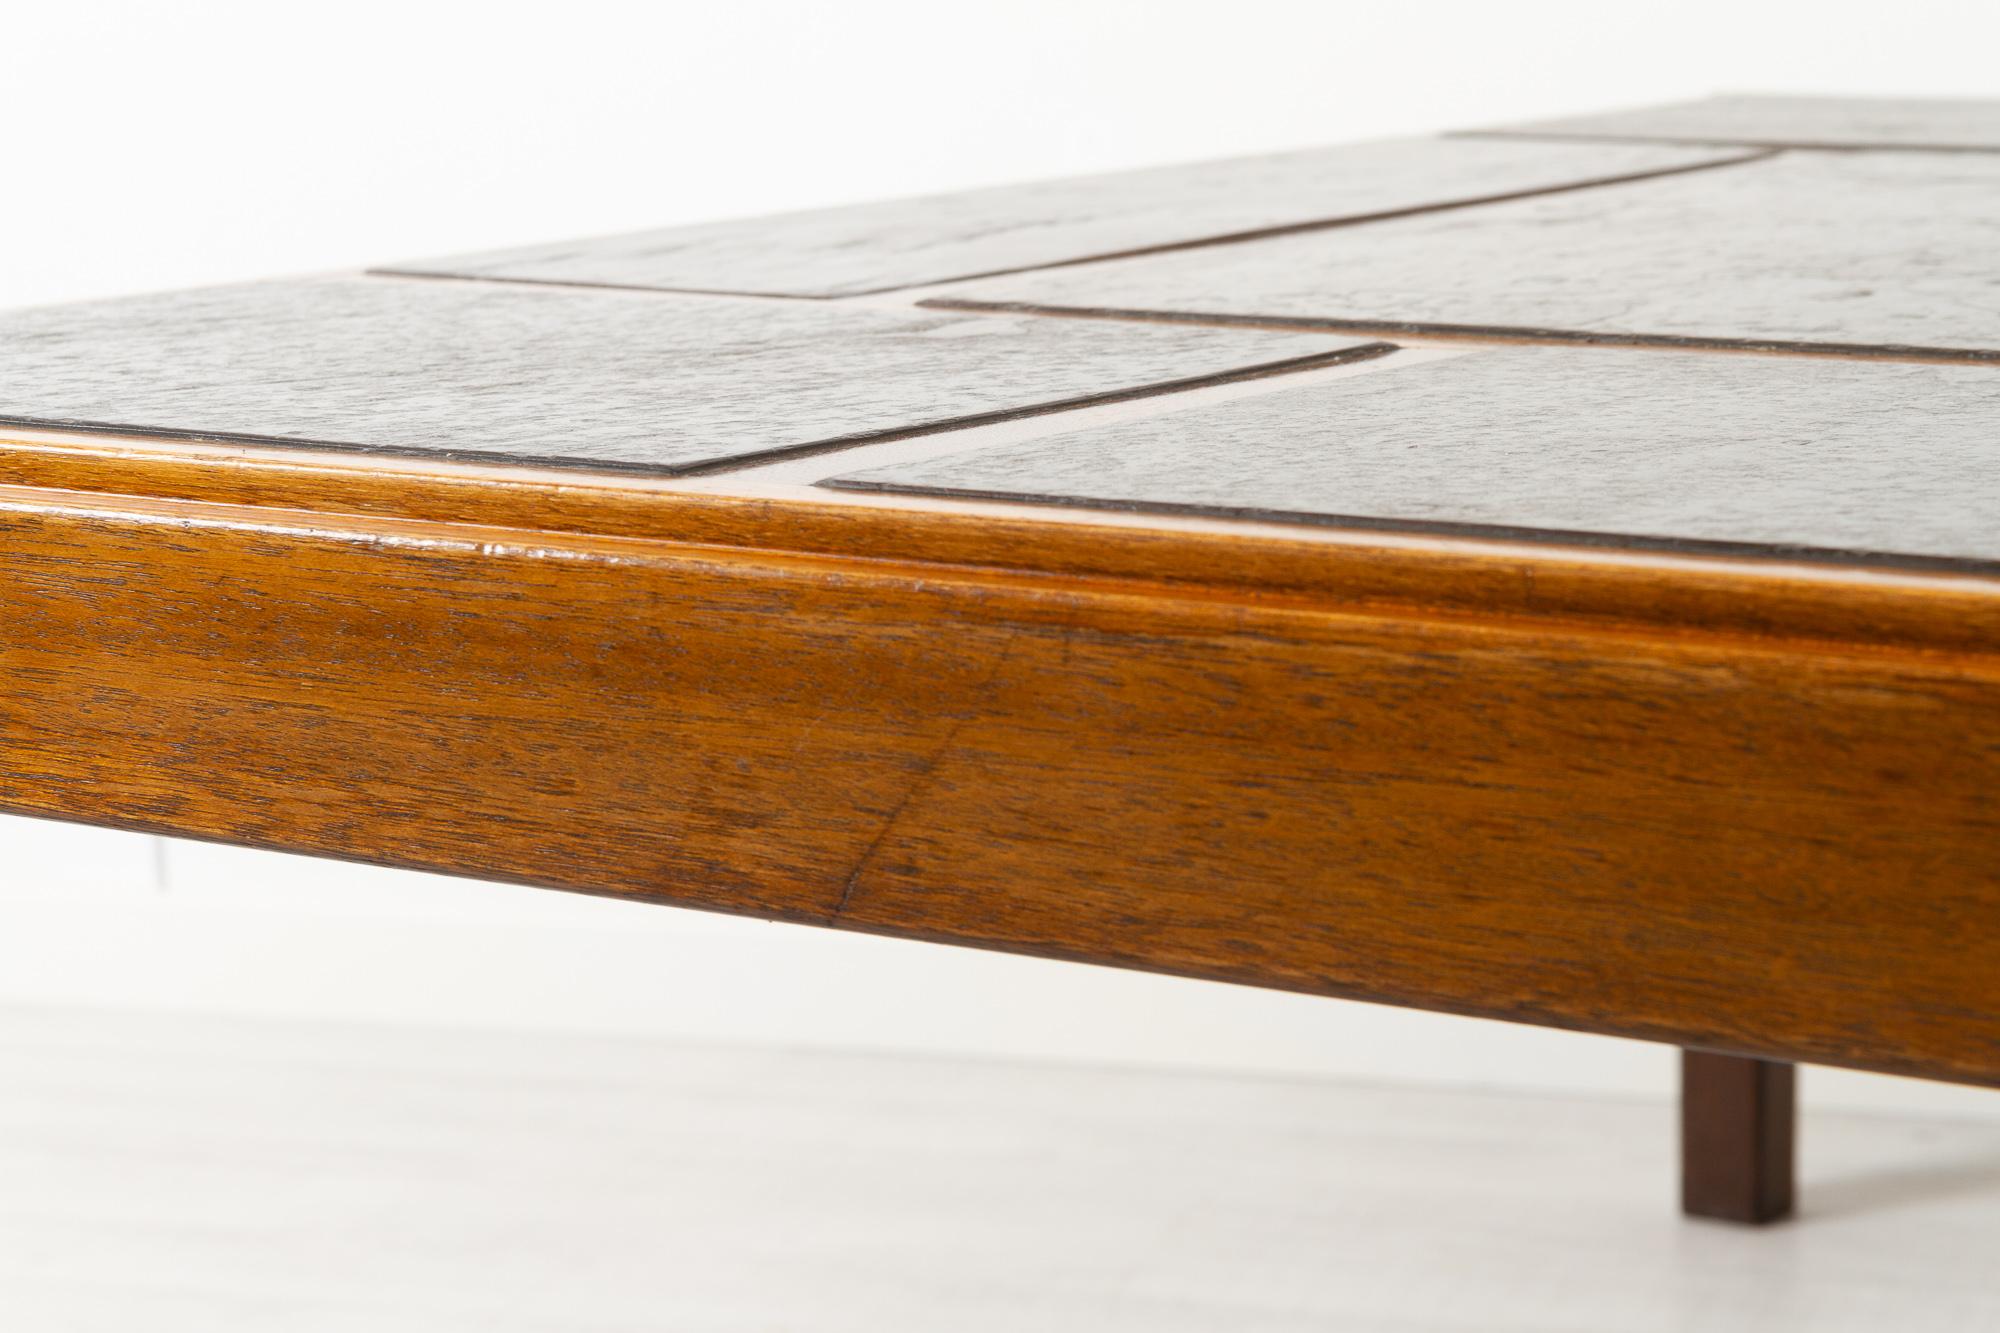 Vintage Danish Slate Coffee Table by Svend Langkilde, 1970s For Sale 1